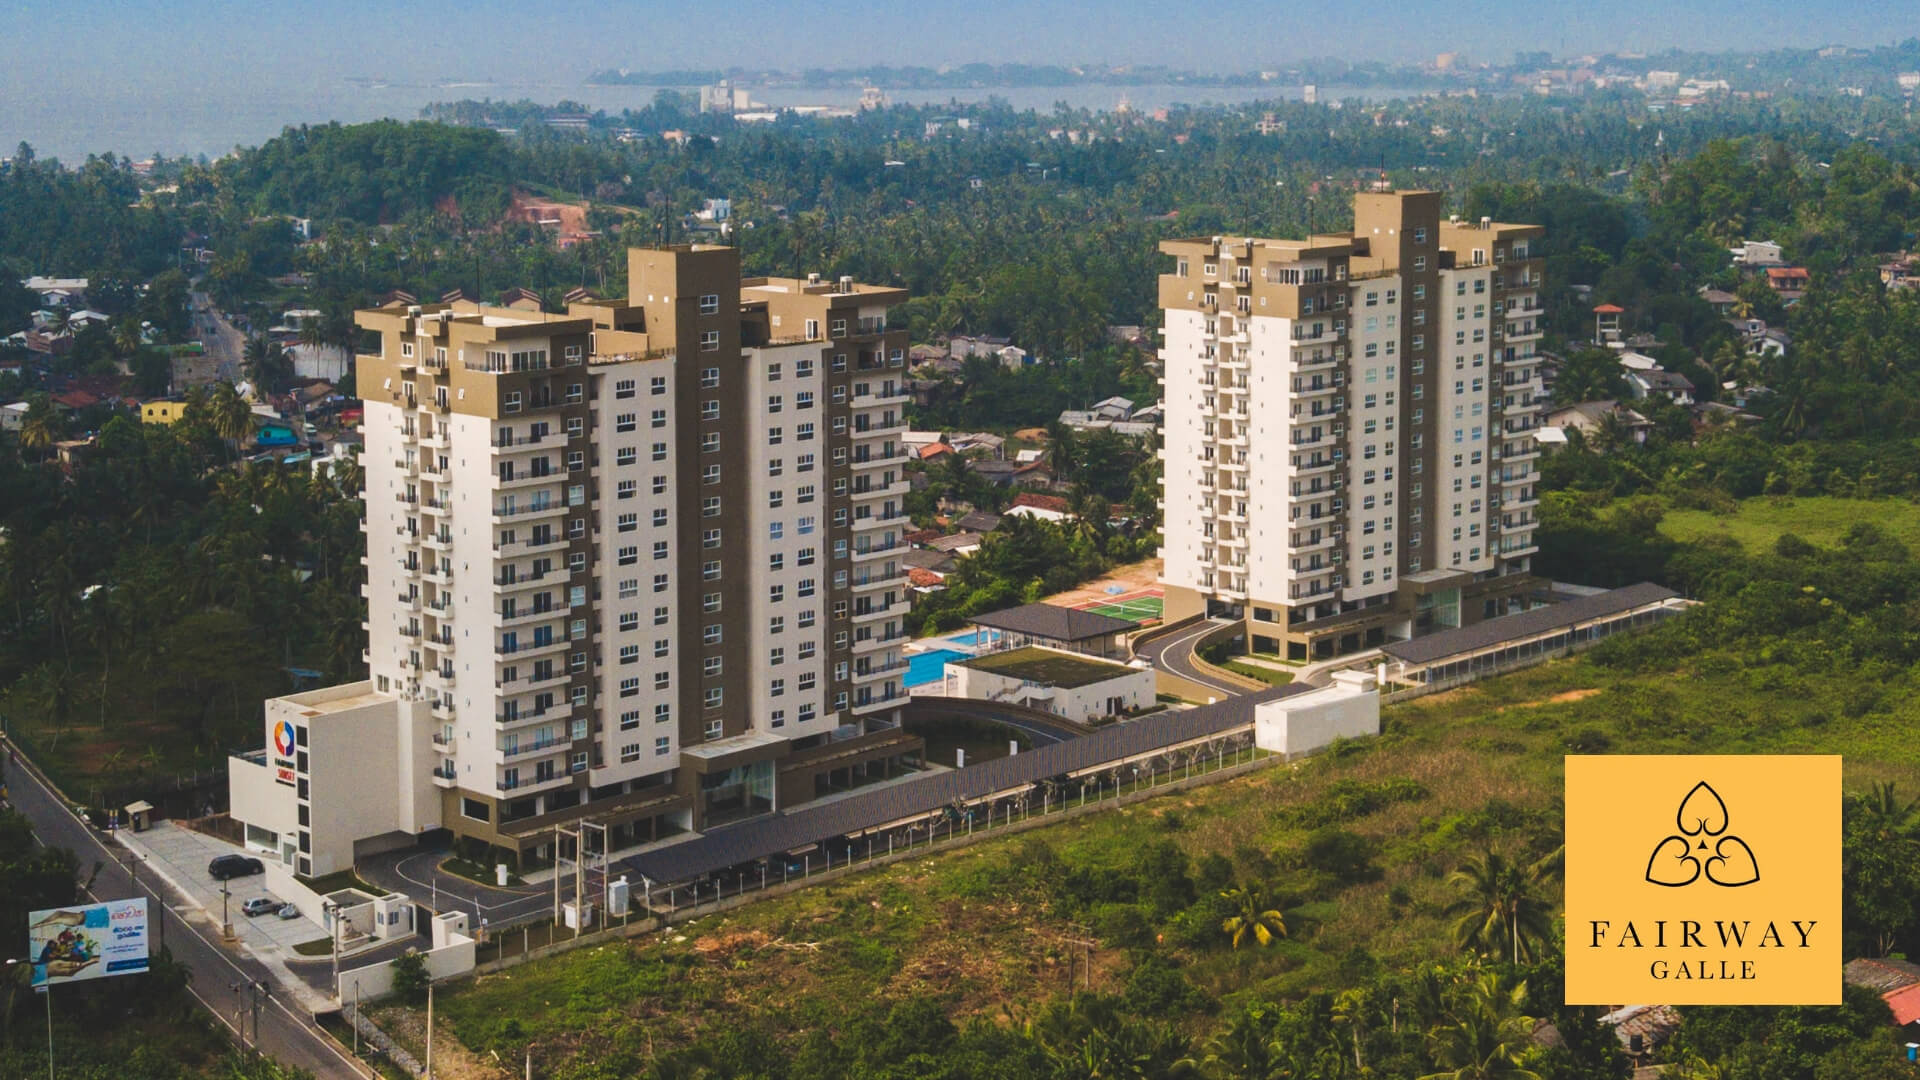 Fairway Galle wins at Asia Pacific Property Awards 2019 - 2020